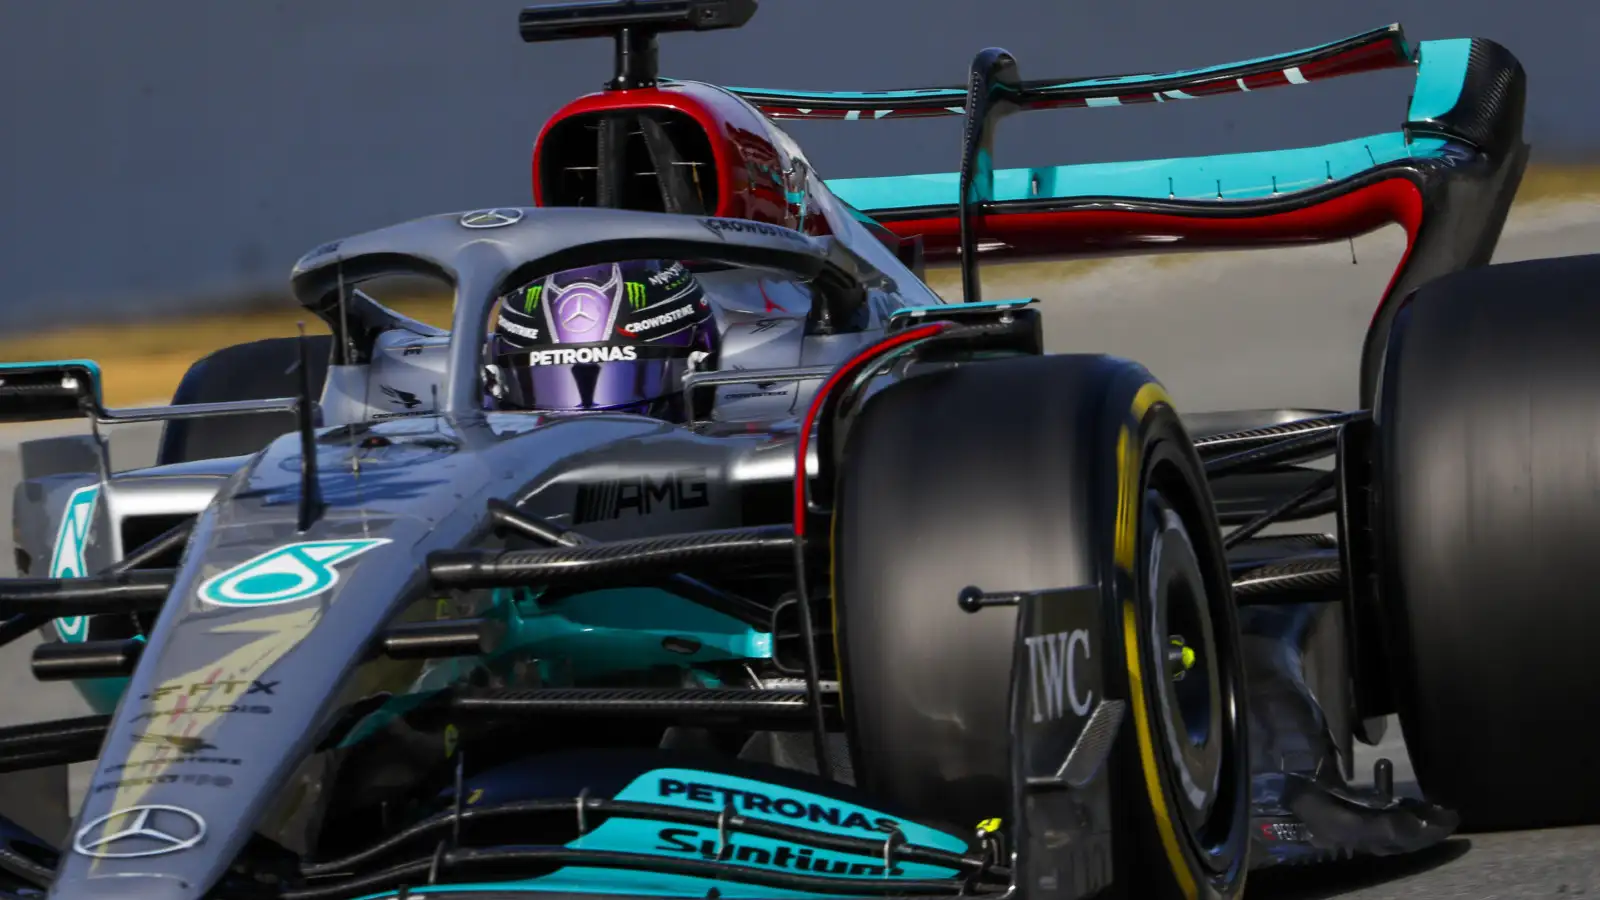 Mercedes driver Lewis Hamilton opens his DRS at the Spanish Grand Prix. Barcelona, May 2022.